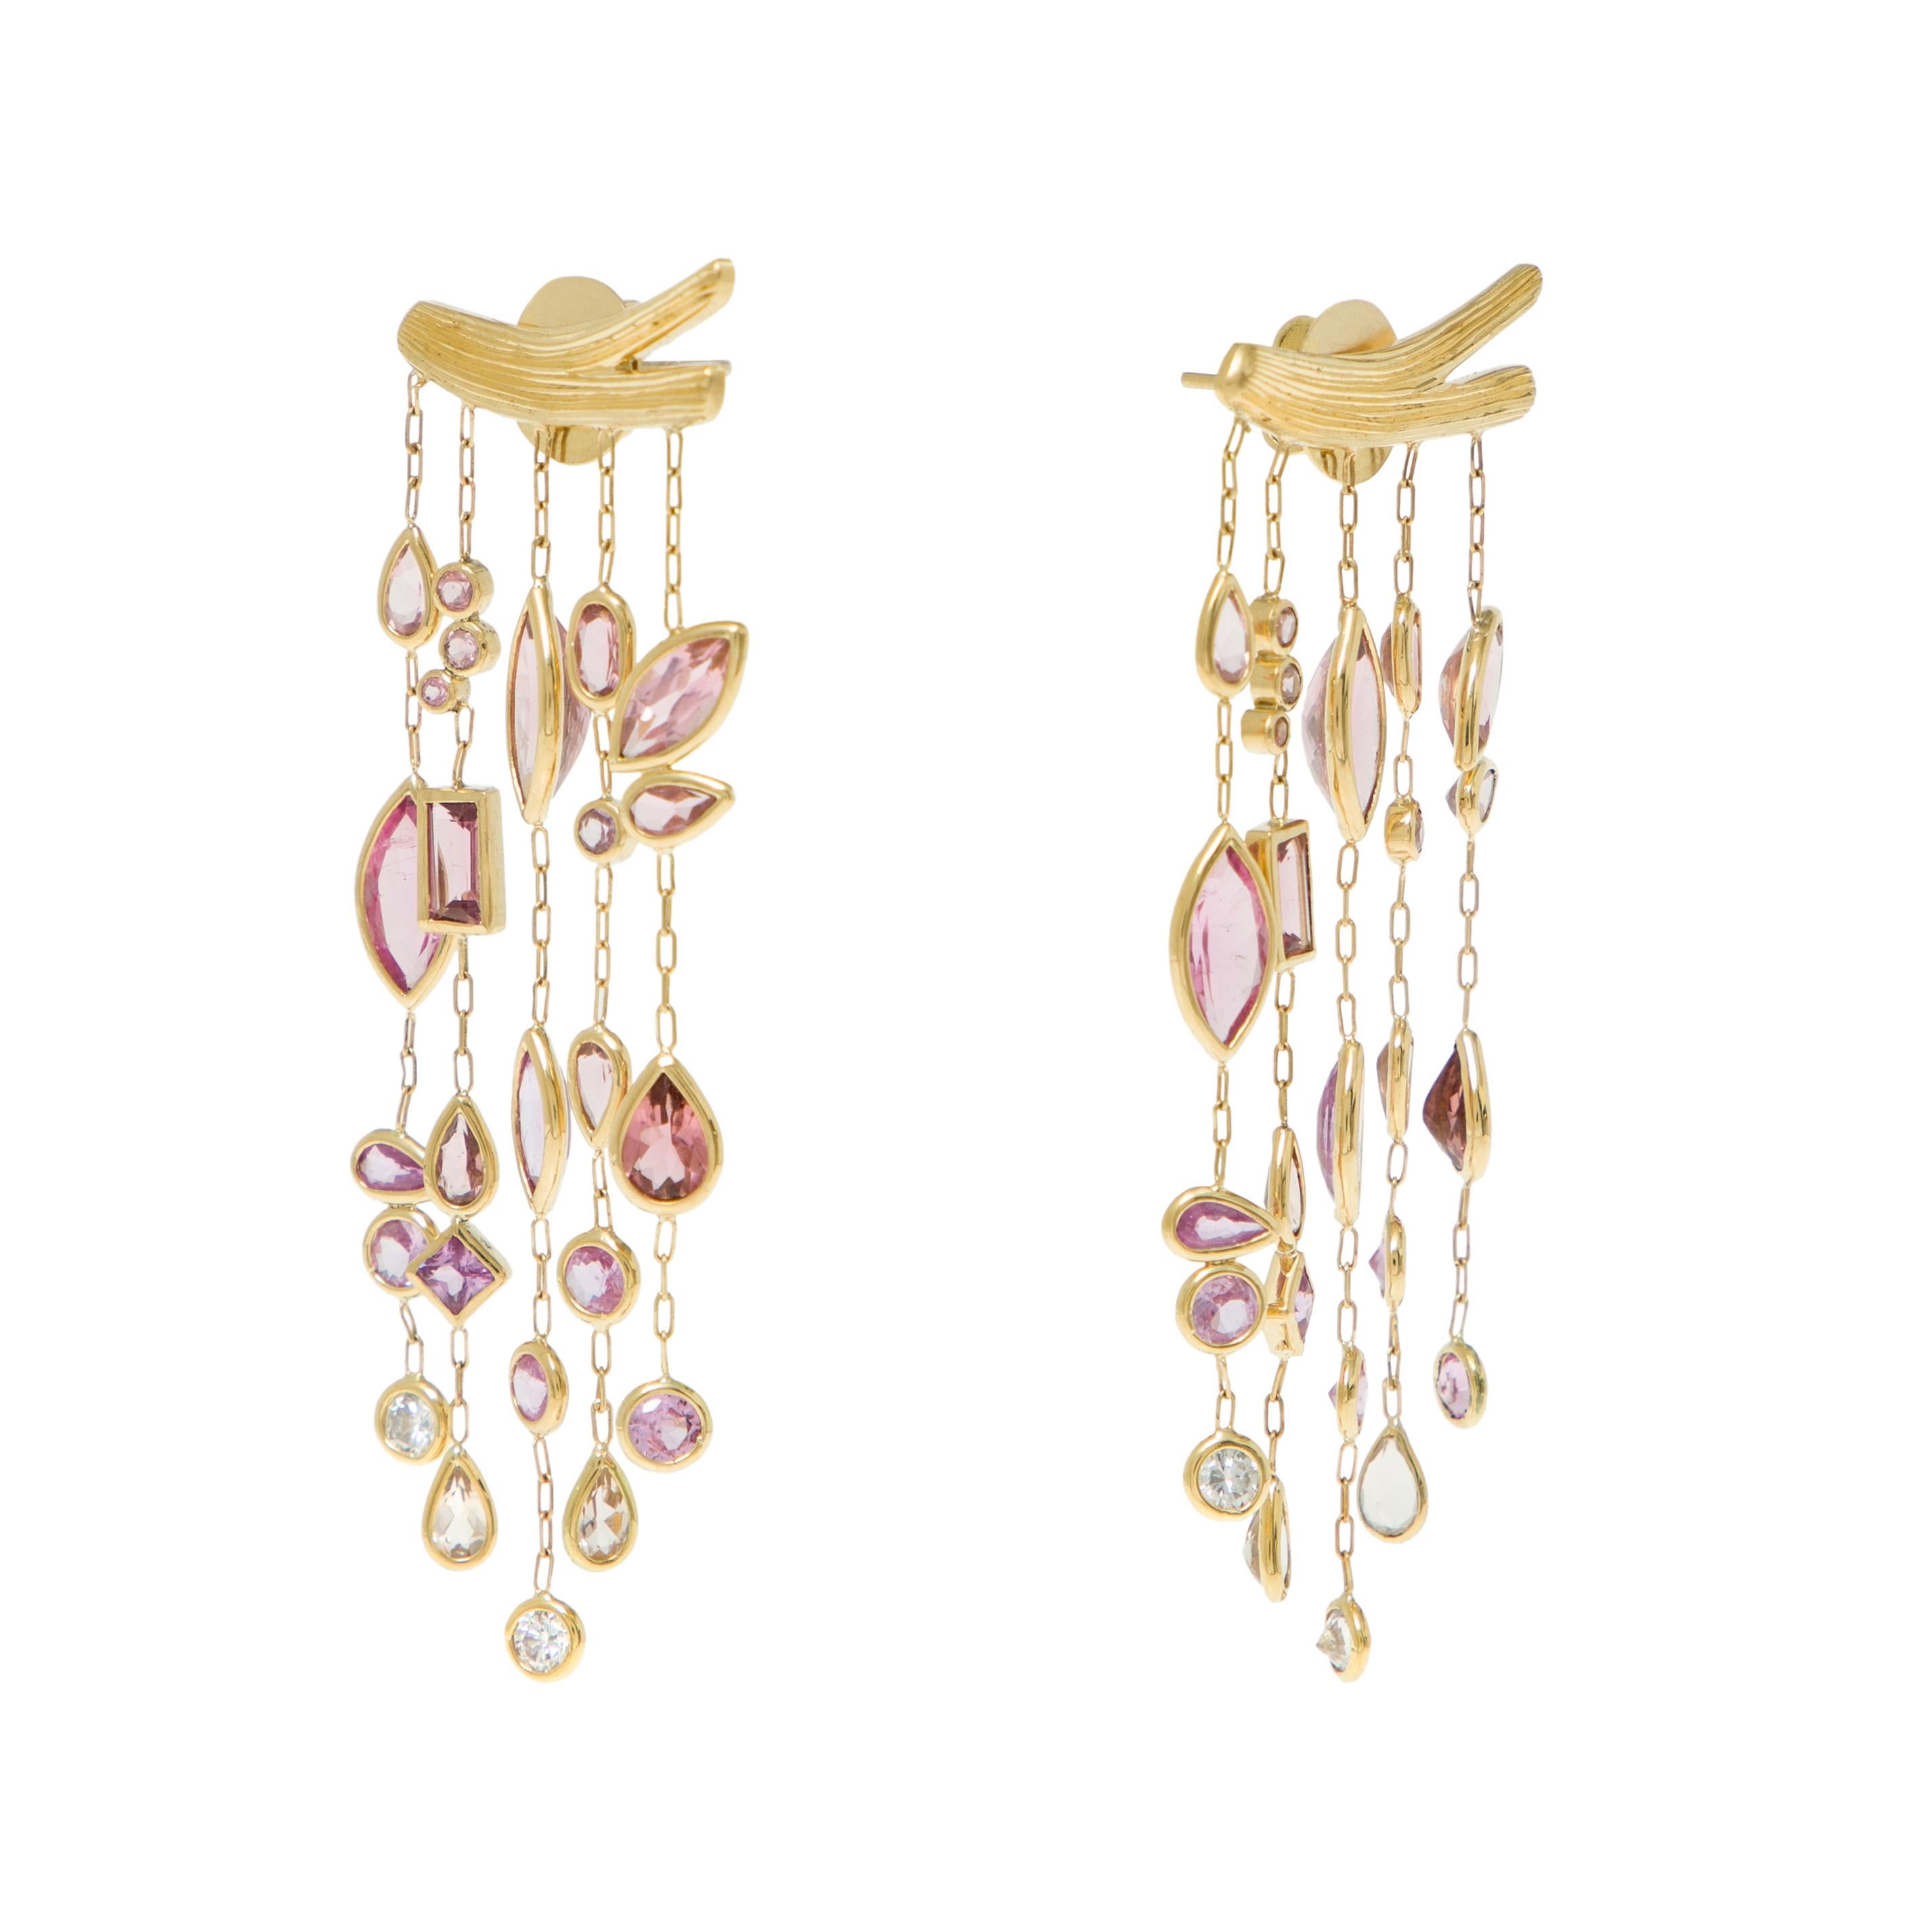 Dangle Earrings
Gold 18K 
Pink Tourmalines, Pink Sapphires, Morganites and Pink Diamonds
Handmade, polished finish and bezel setting.

Golden A' Design Award Winner (2019-2020)

These earrings were inspired by Van Gogh’s 